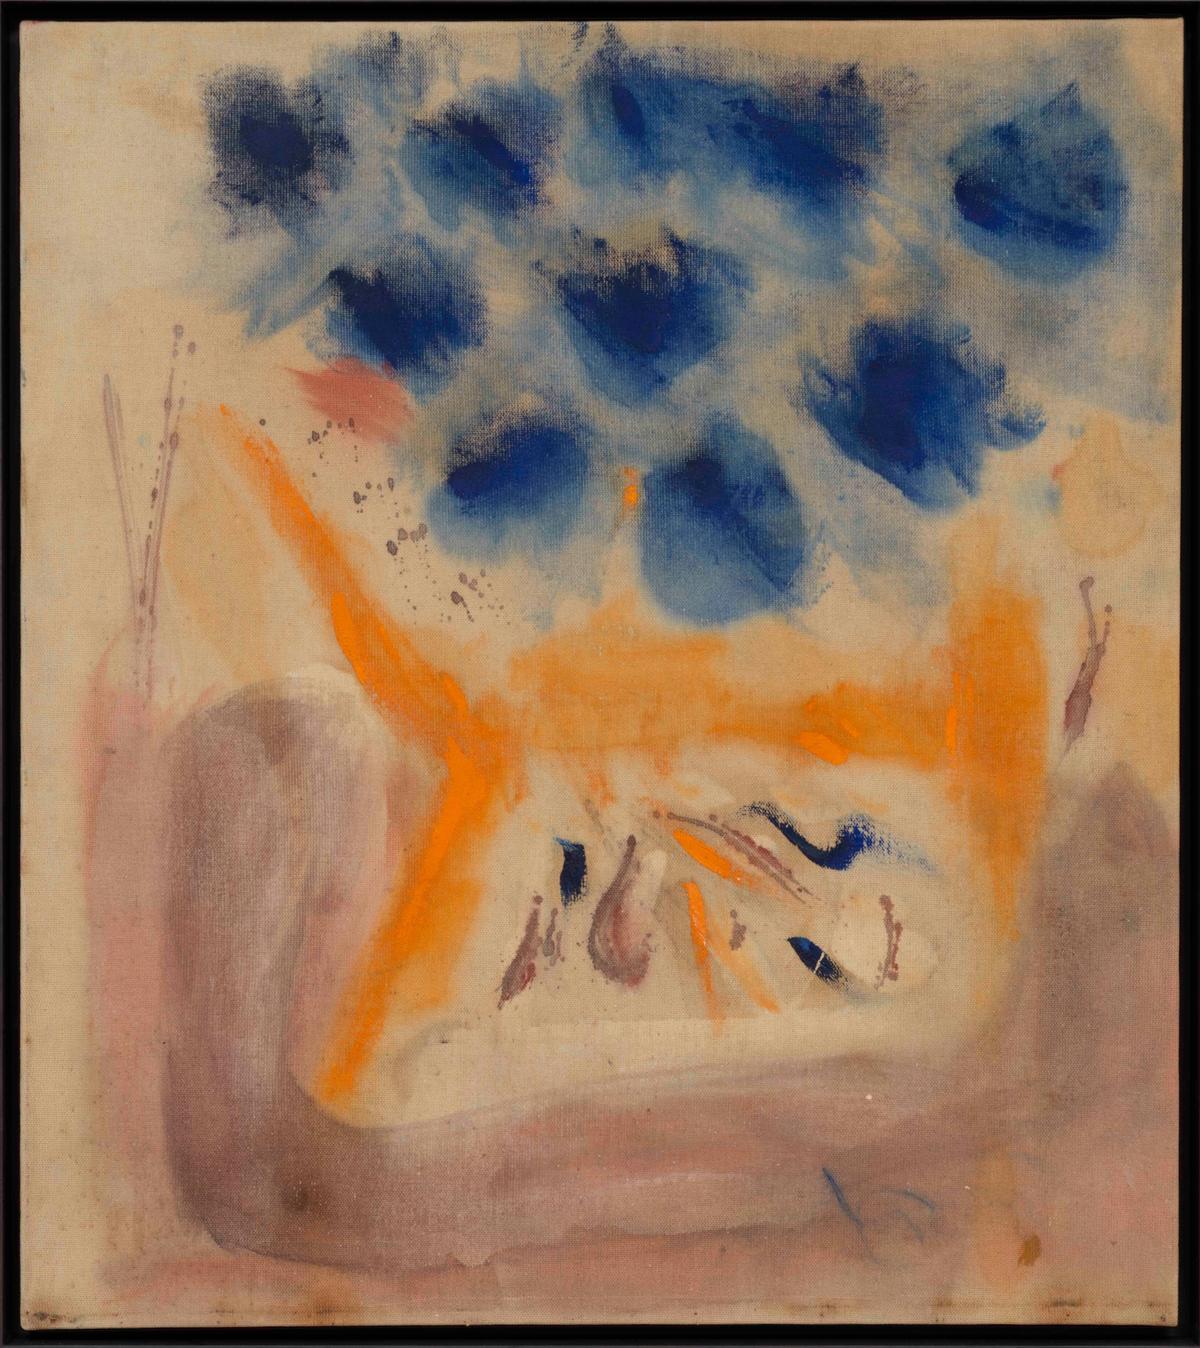 With Blue (1953) by Helen Frankenthaler © 2019 Helen Frankenthaler Foundation, Inc./Artists Rights Society (ARS), New York. Photo: Rob McKeever. Courtesy Gagosian